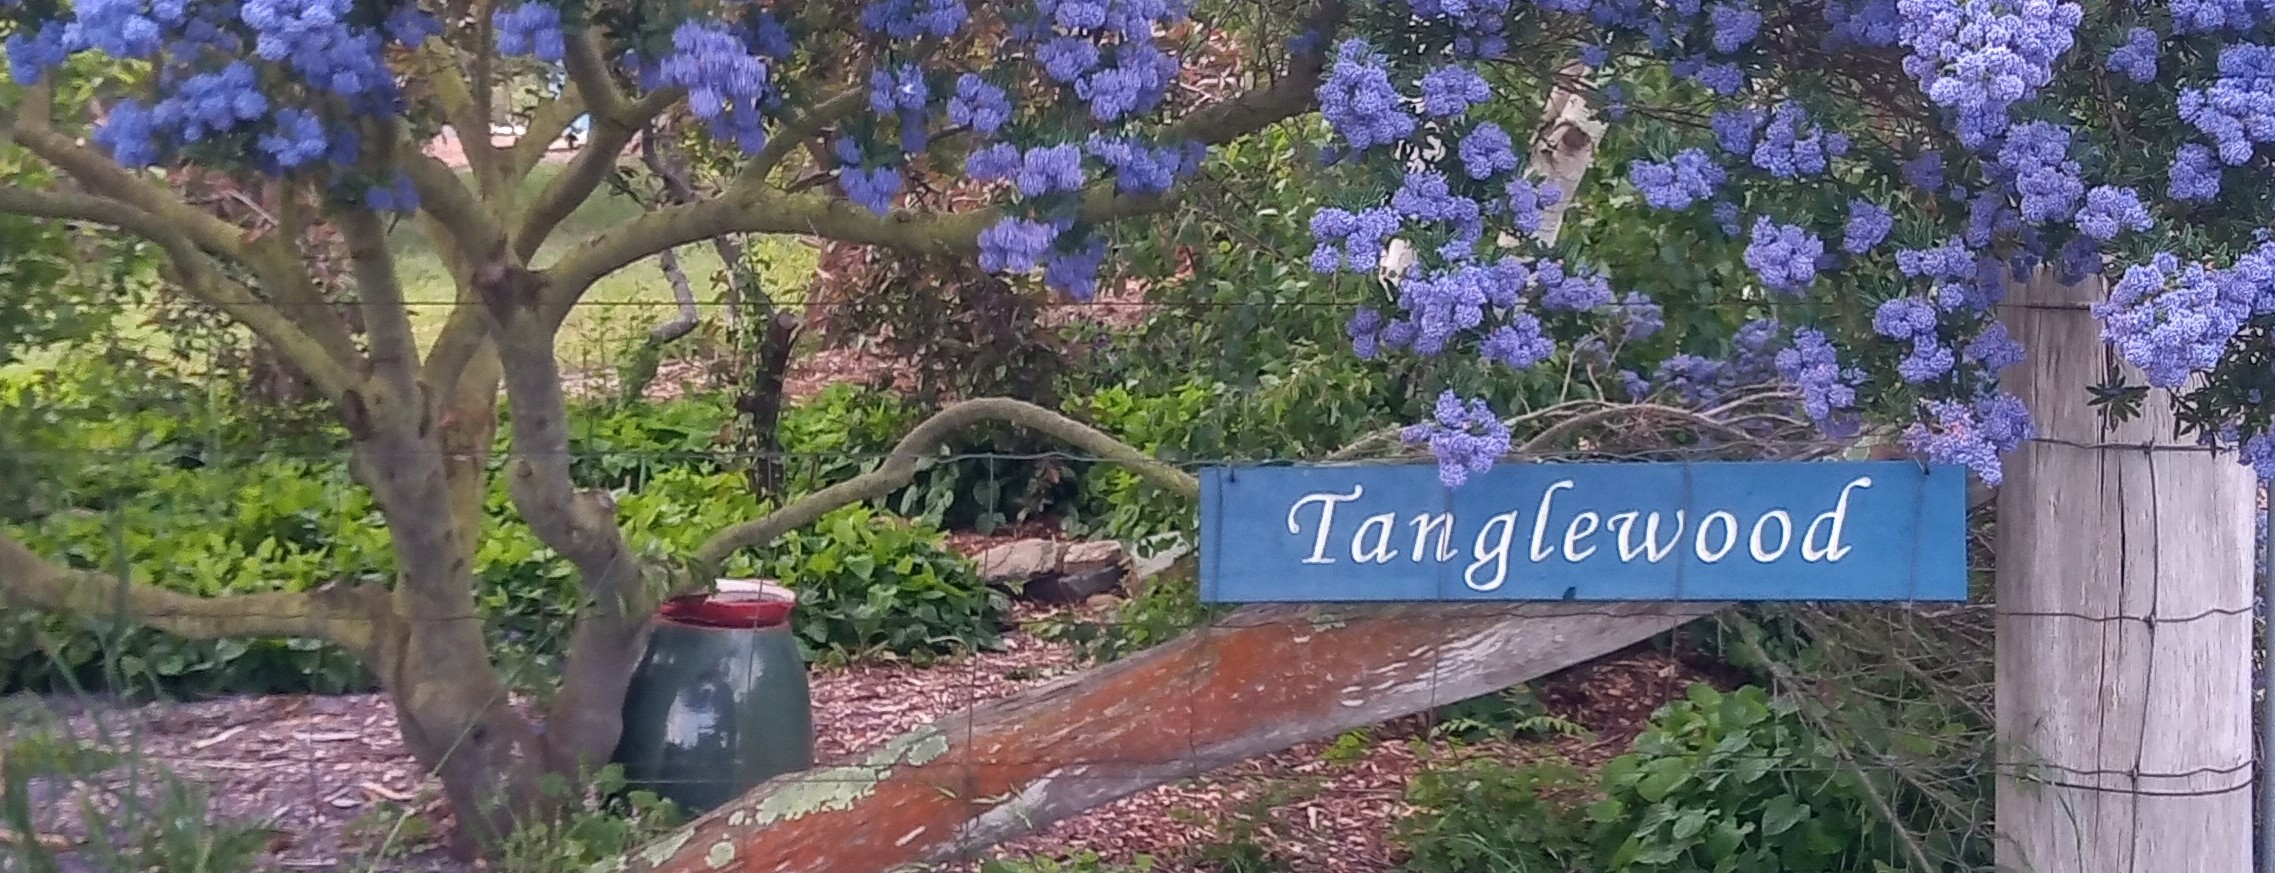 The Tanglewood Sign welcoming you to the permaculture internship at Tanglewood Farm. Visitors, students, and interns are invited by Leonie-Ruth and David Acland's permaculture farm.